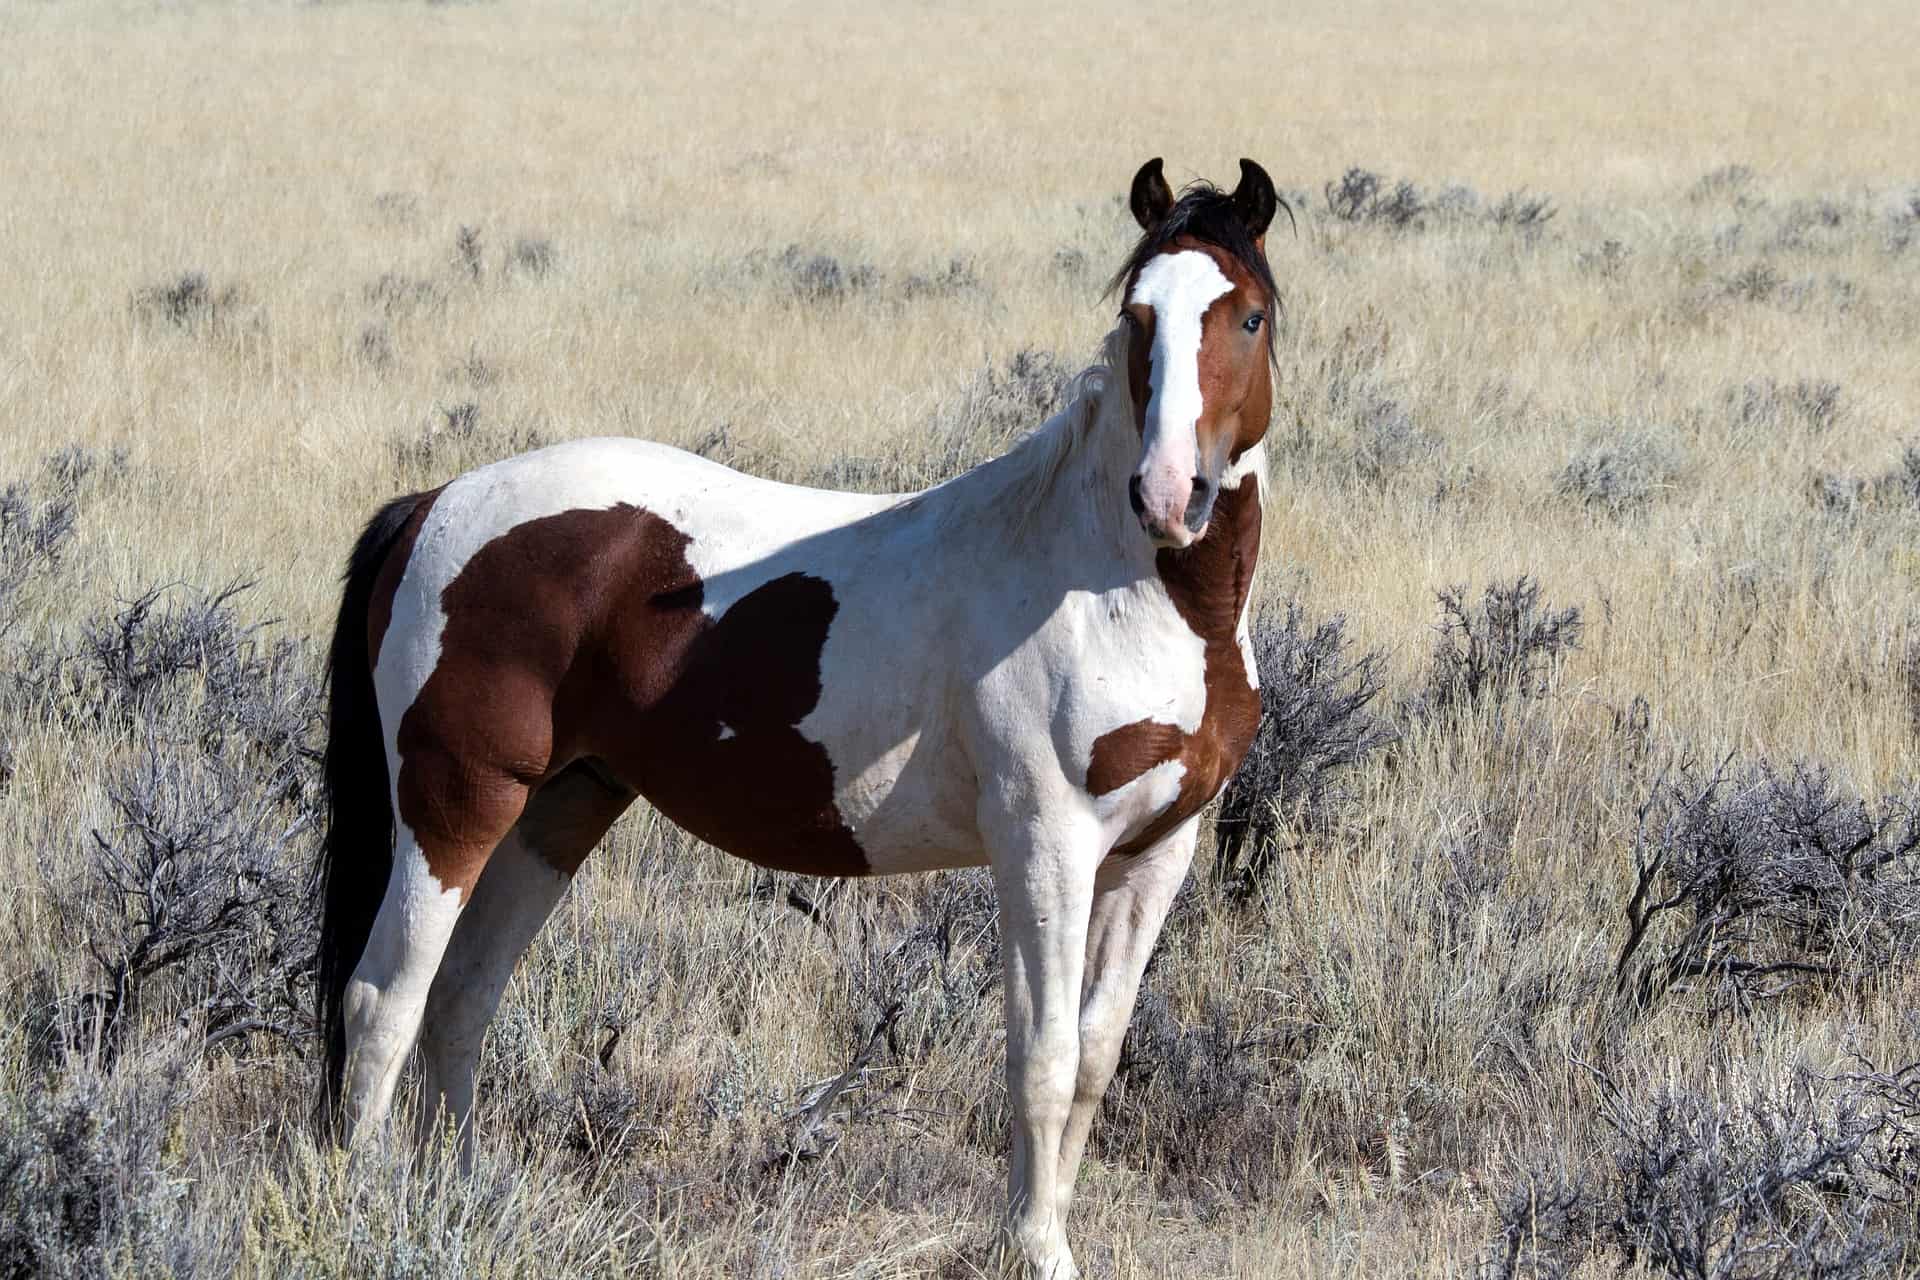 American Quarter Horse Lifespan: How Long Do These Beautiful Horses Live?